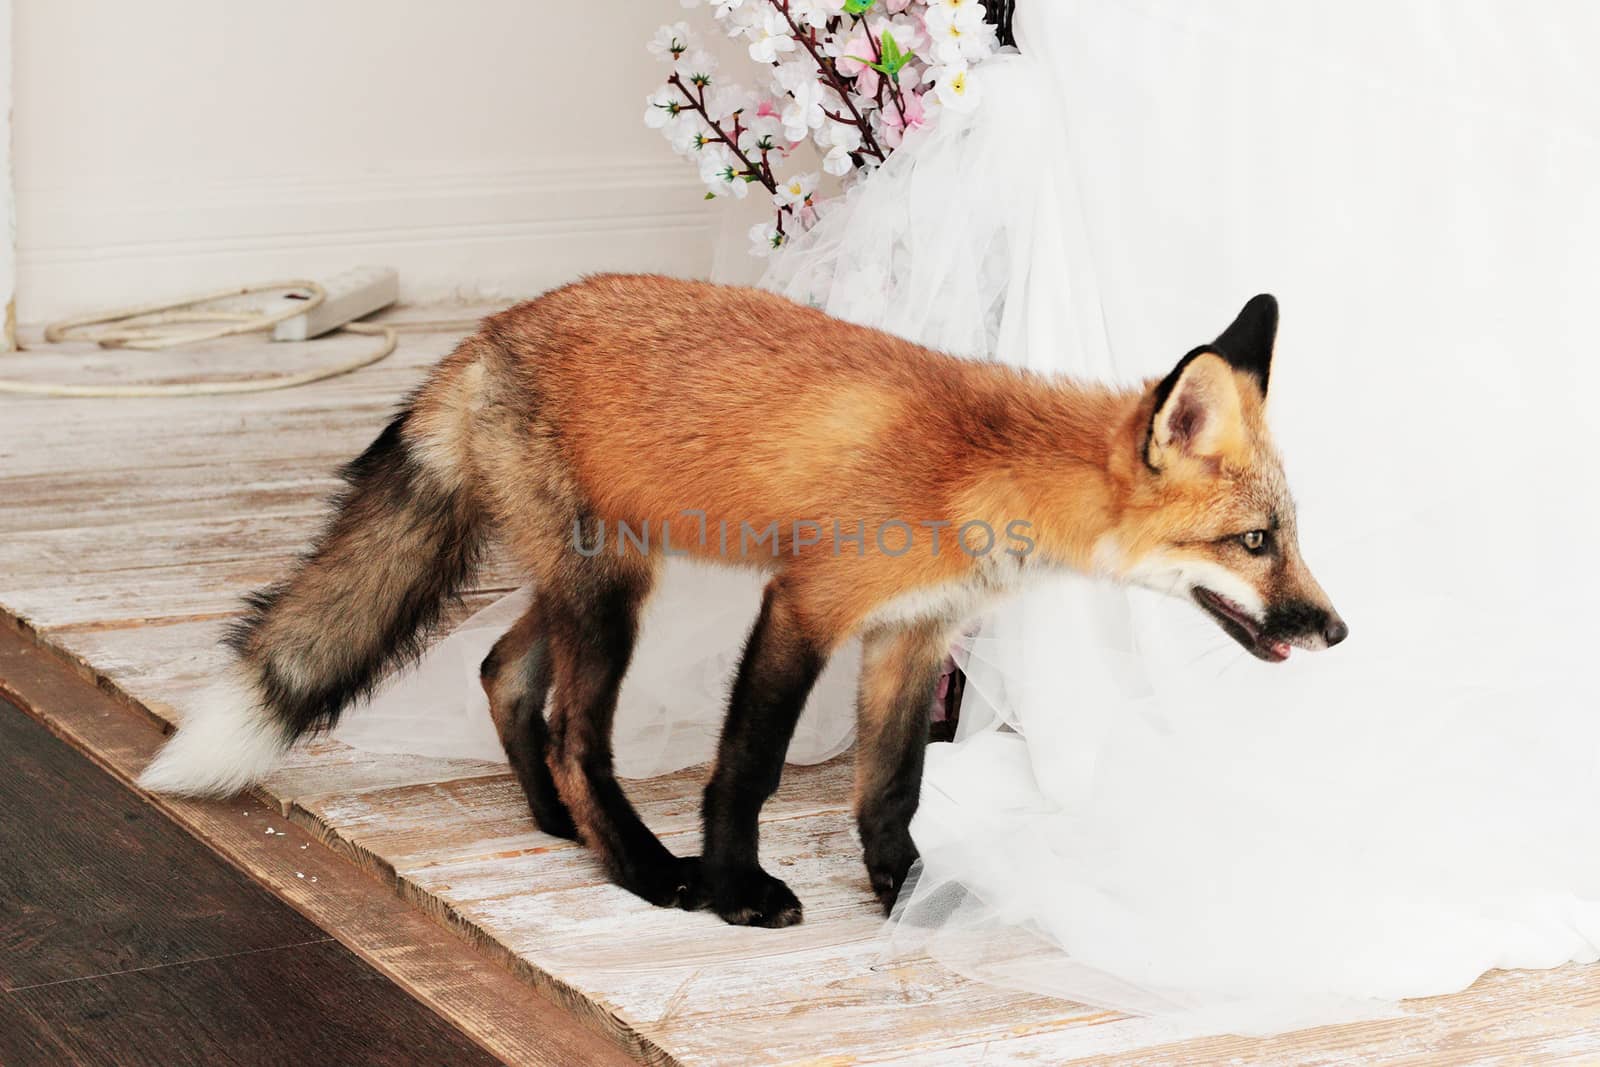 A lovely red fox with interest examines the room.